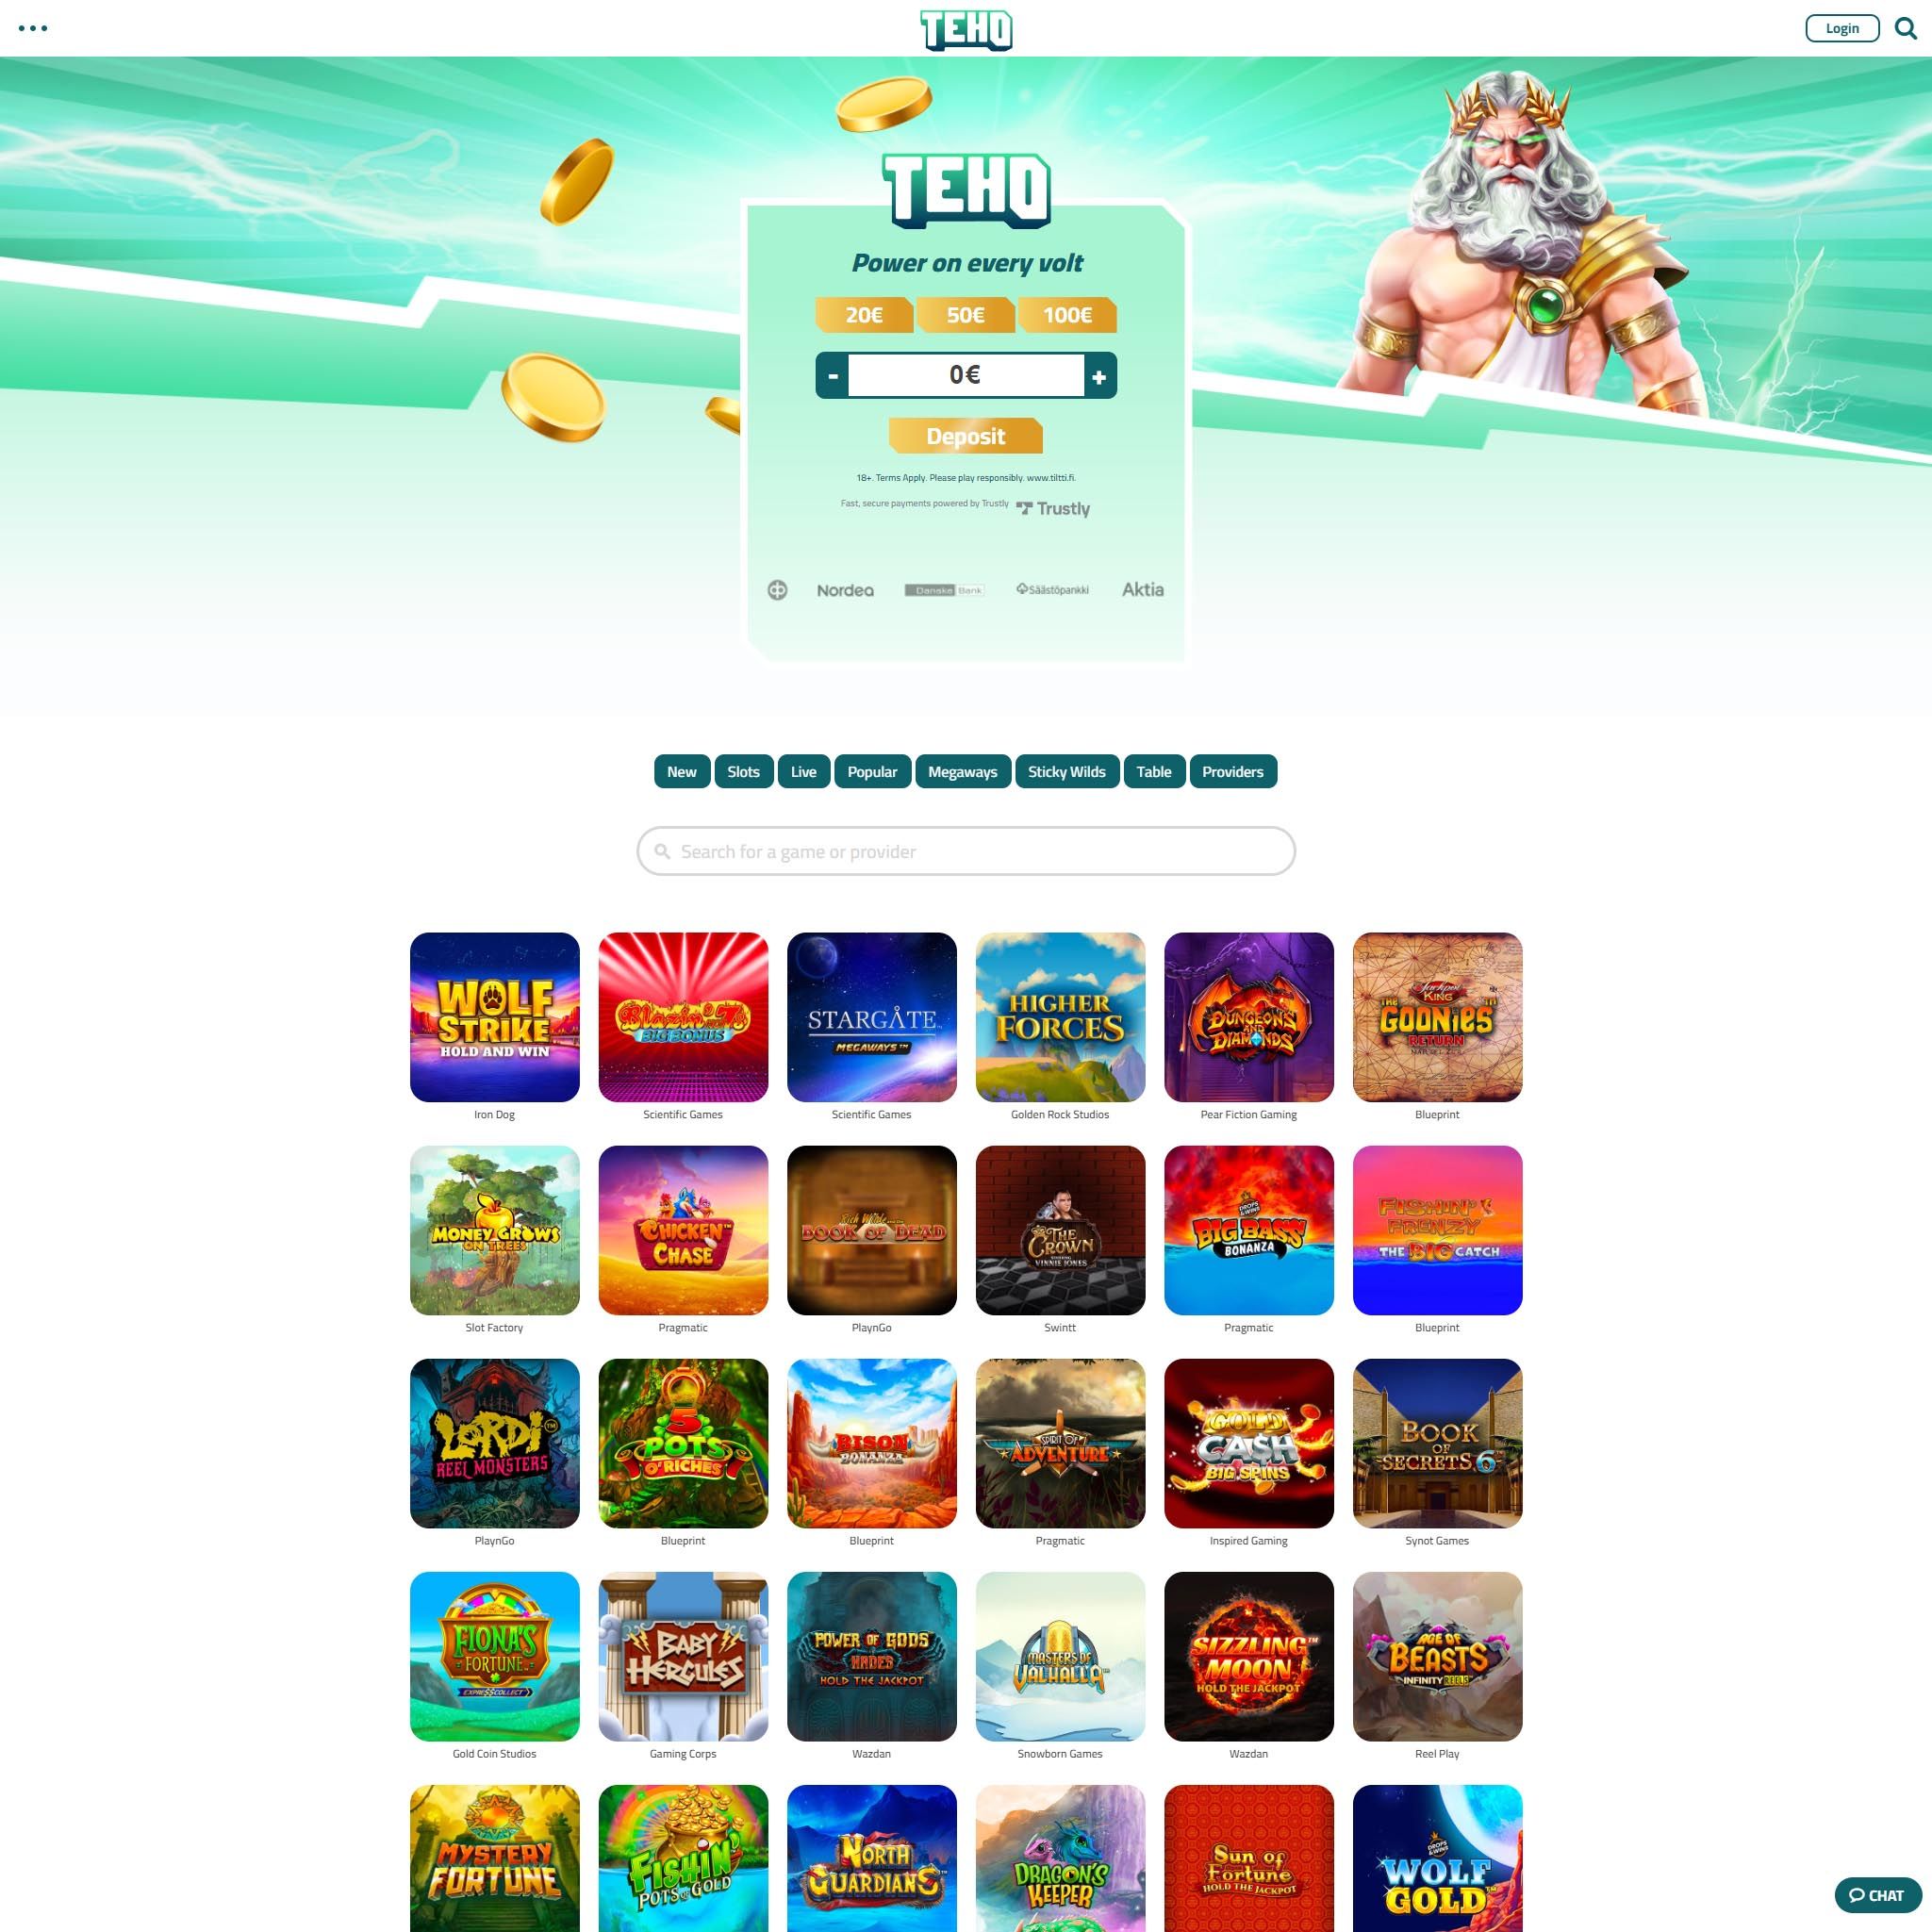 Teho Casino review by Mr. Gamble